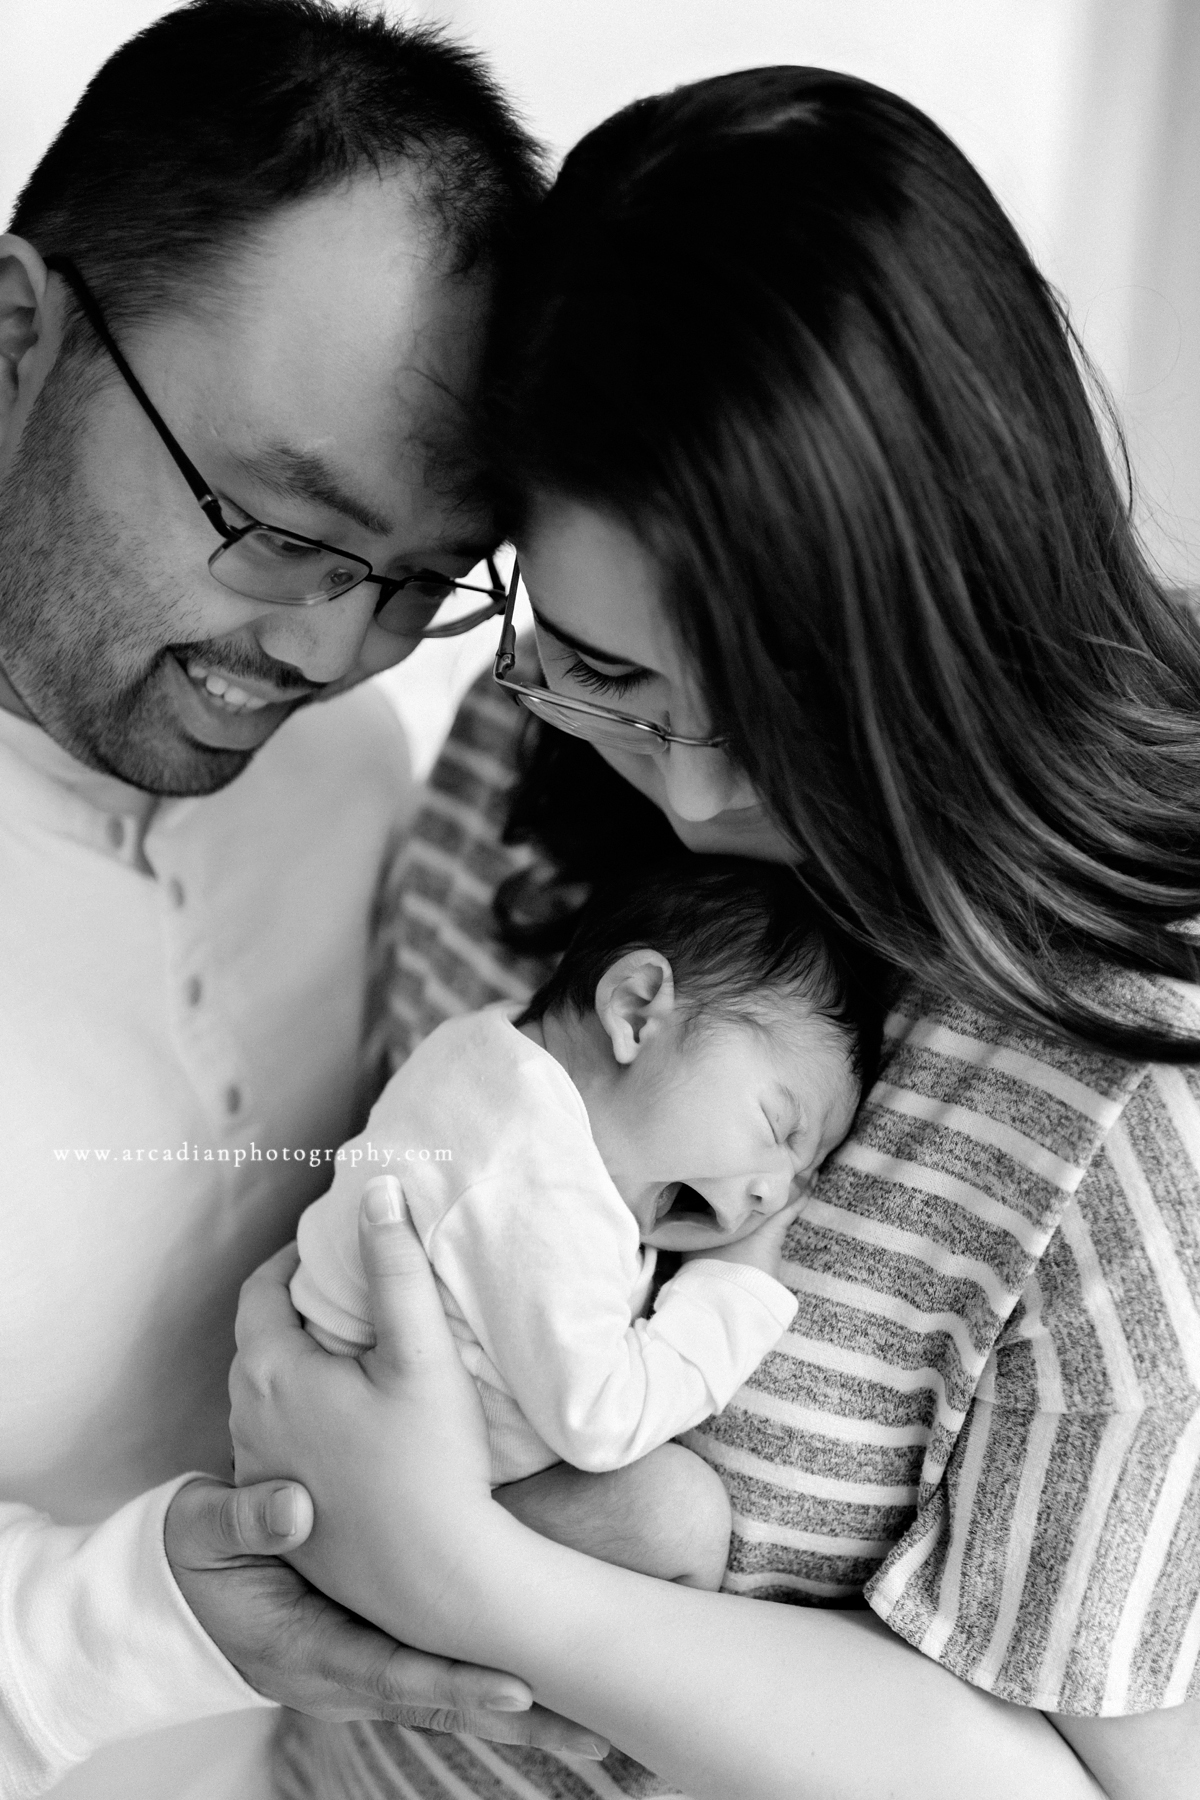 Snuggled with mom and dad - learn more about booking newborn photos.